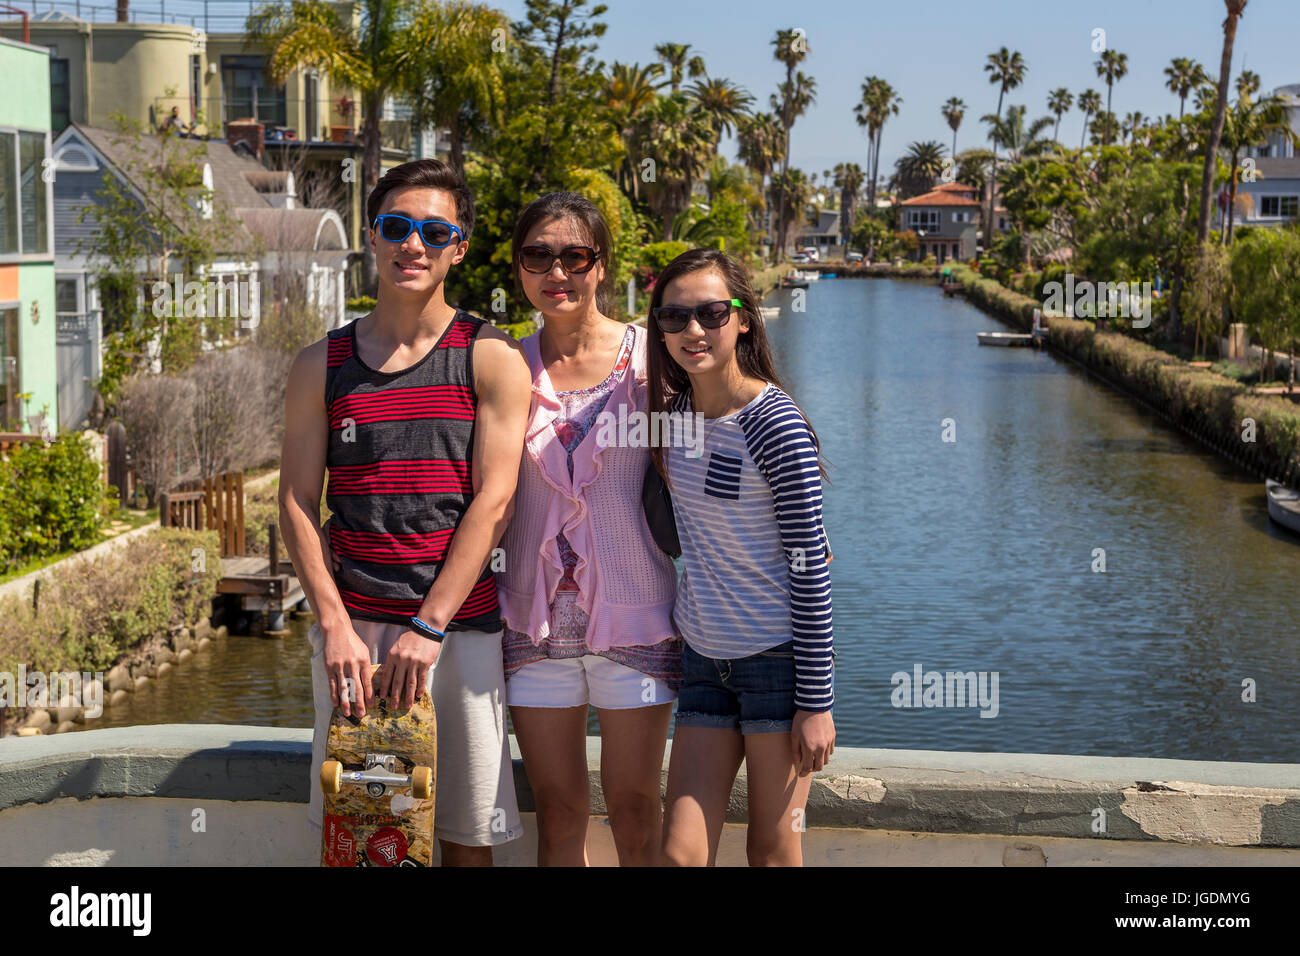 people, tourists, visitors, visiting, canal, Venice Canals, Venice Canal Historic District, Venice, Los Angeles, California, United States Stock Photo